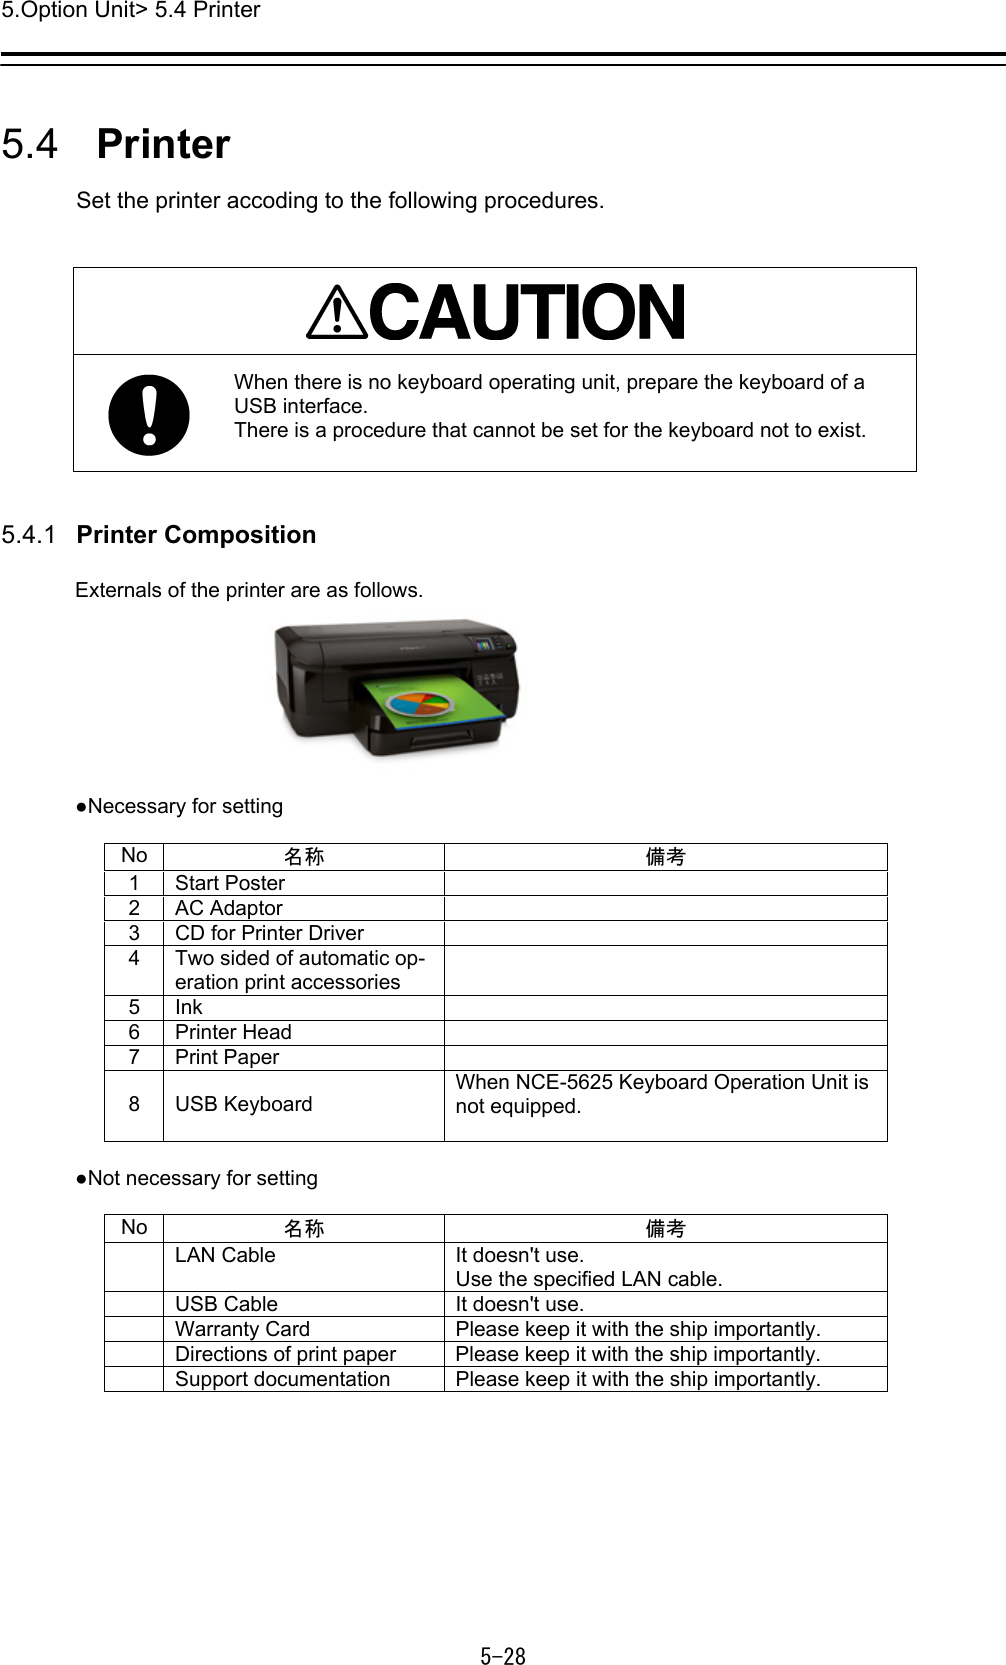 5.Option Unit&gt; 5.4 Printer 5-28  5.4   Printer Set the printer accoding to the following procedures.   When there is no keyboard operating unit, prepare the keyboard of a USB interface.   There is a procedure that cannot be set for the keyboard not to exist.   5.4.1   Printer Composition  Externals of the printer are as follows.                    ●Necessary for setting    No  名称 備考 1 Start Poster   2 AC Adaptor   3  CD for Printer Driver   4  Two sided of automatic op-eration print accessories  5 Ink   6 Printer Head   7 Print Paper   8 USB Keyboard When NCE-5625 Keyboard Operation Unit is not equipped.  ●Not necessary for setting  No  名称 備考   LAN Cable  It doesn&apos;t use.   Use the specified LAN cable.   USB Cable  It doesn&apos;t use.   Warranty Card  Please keep it with the ship importantly.   Directions of print paper  Please keep it with the ship importantly.  Support documentation  Please keep it with the ship importantly.  